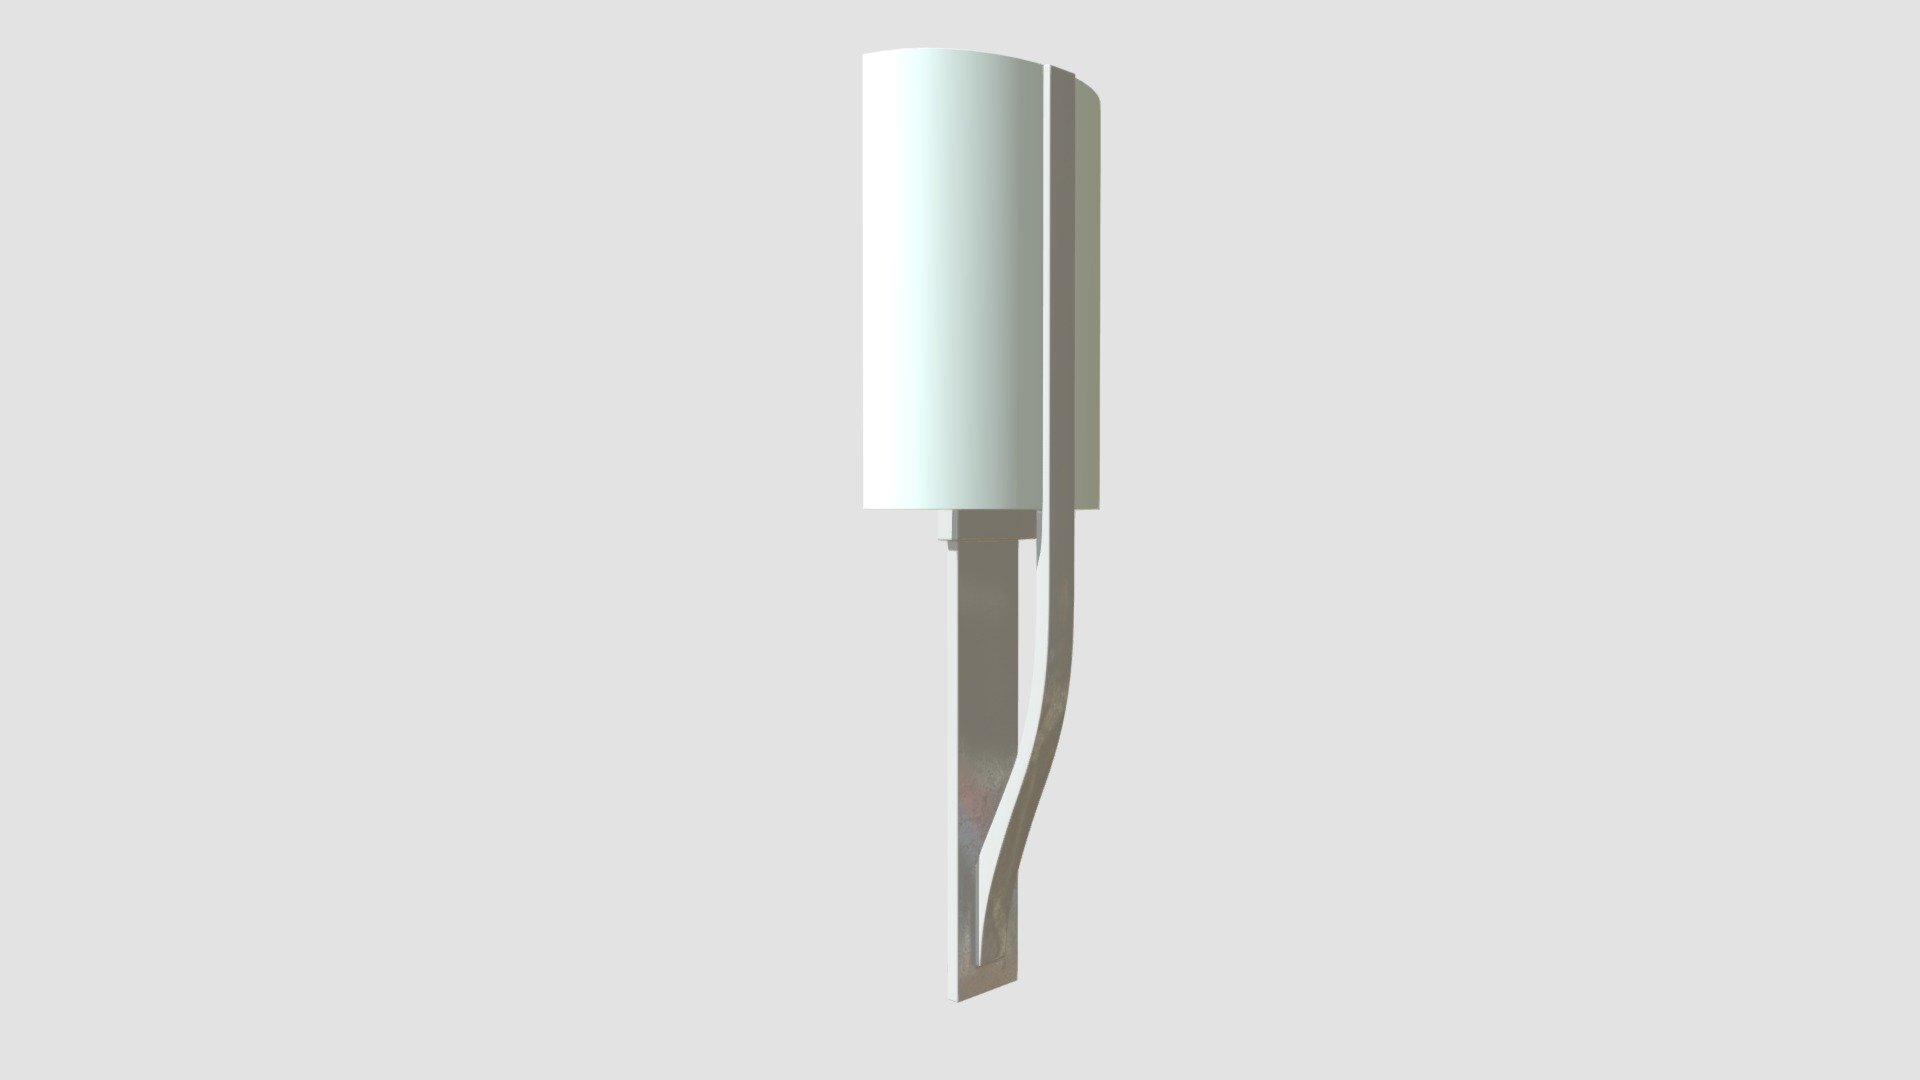 Lamp Buy Royalty Free 3d Model By Evermotion 1d6a2e8 Sketchfab Store 4599